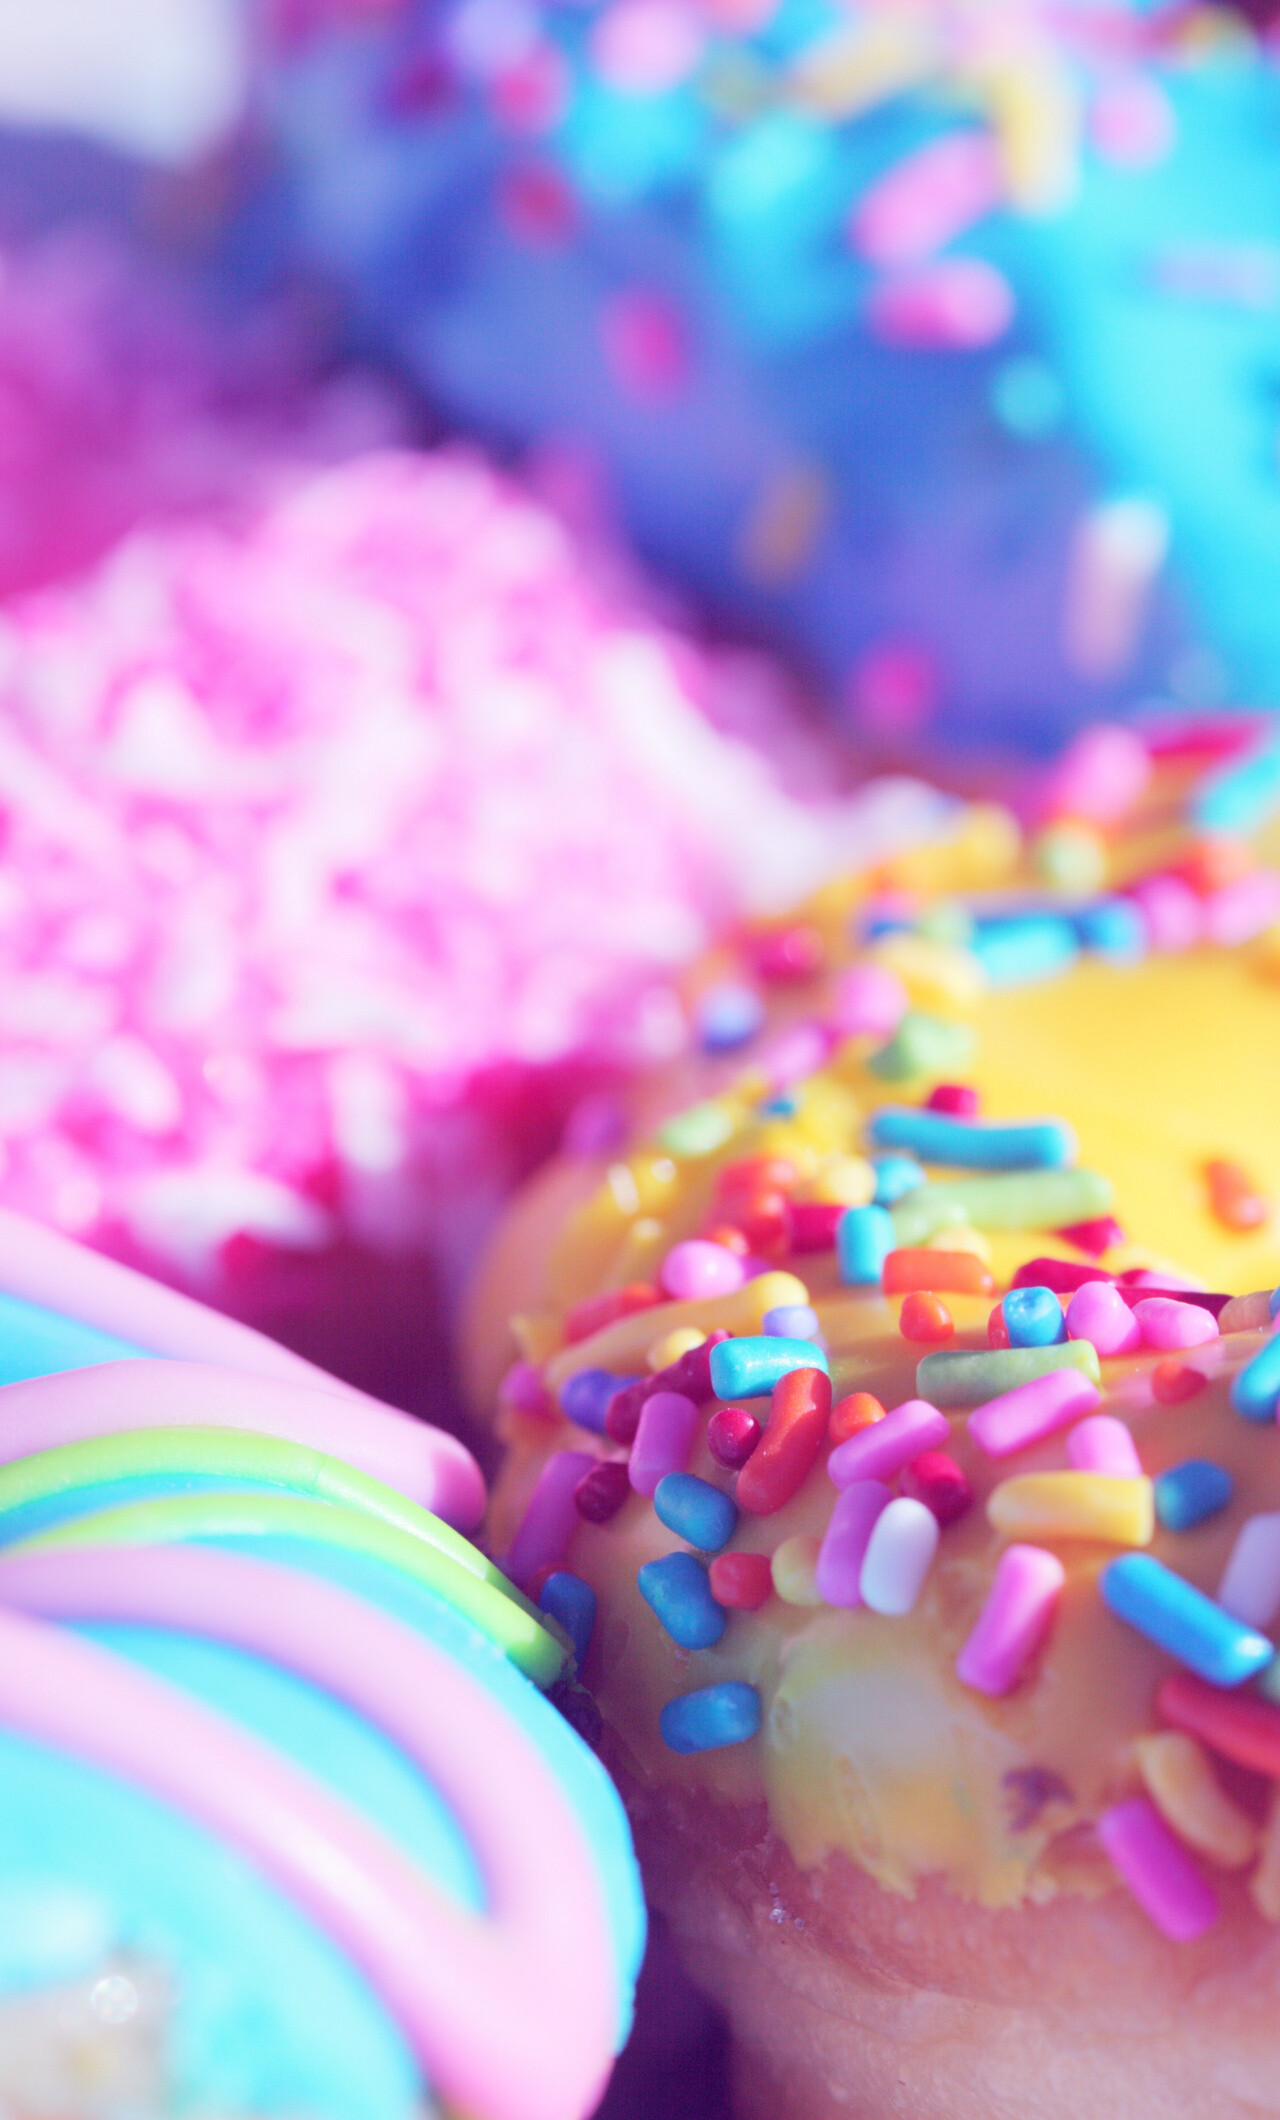 Sweets: Doughnut, Baked goods, Sprinkles, Close up. 1280x2120 HD Background.